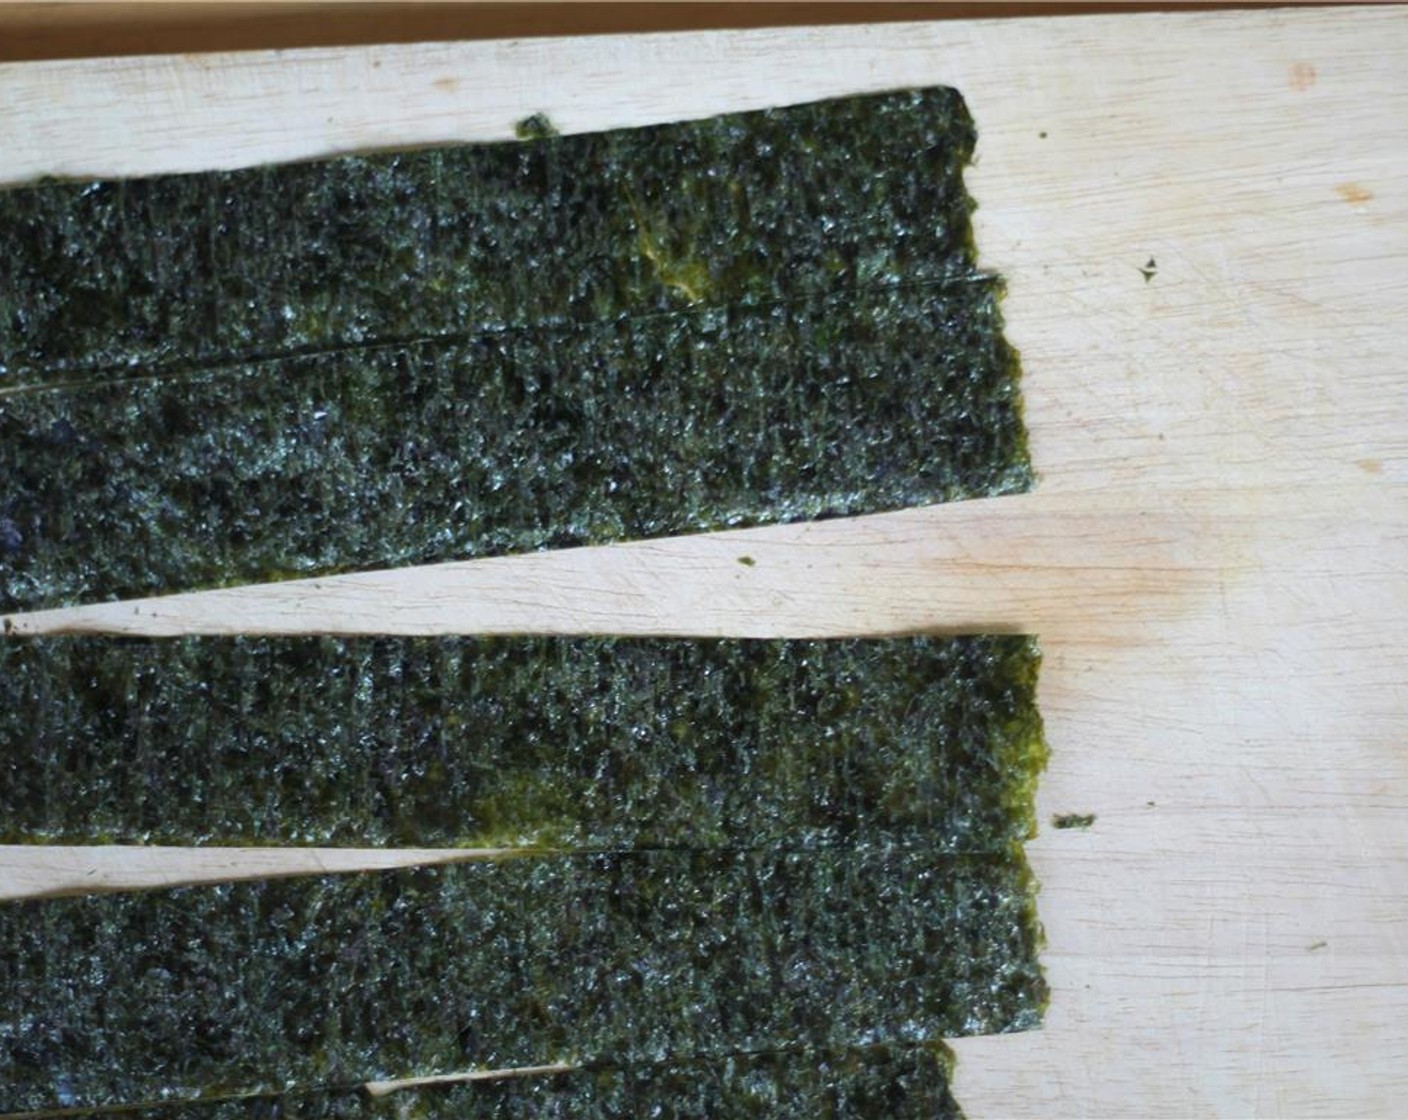 step 8 Meanwhile, cut the Nori Sheet (1 piece) into 1 1/2 inch strips for later.